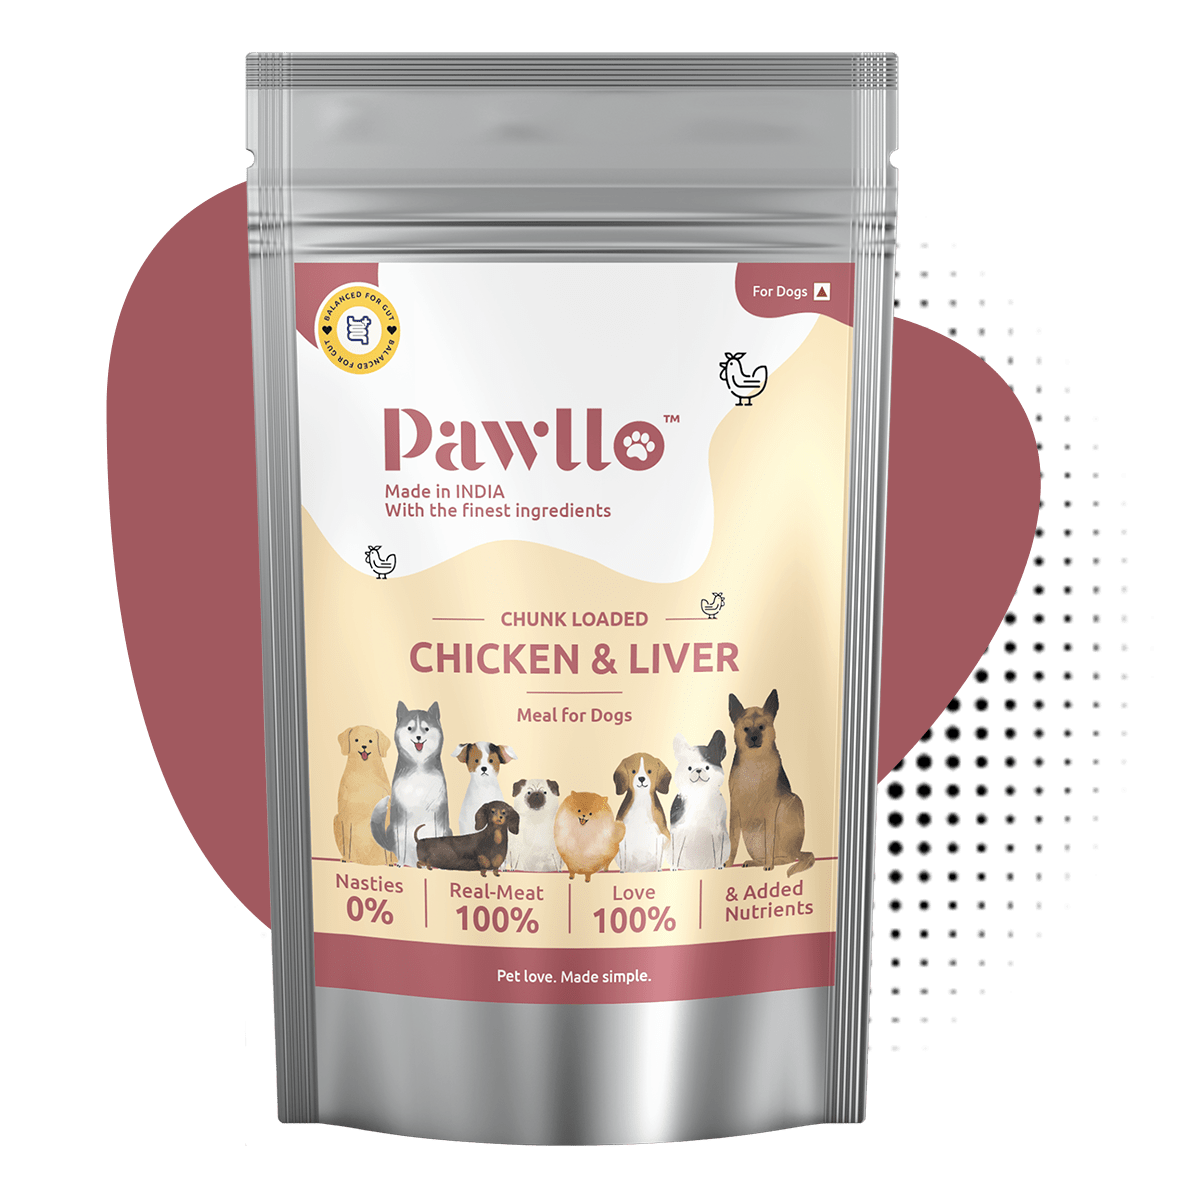 Chicken Liver Gravy (Dogs) - Omega-3 Enriched, Protein-Packed Meal with Chicken and Liver Goodness